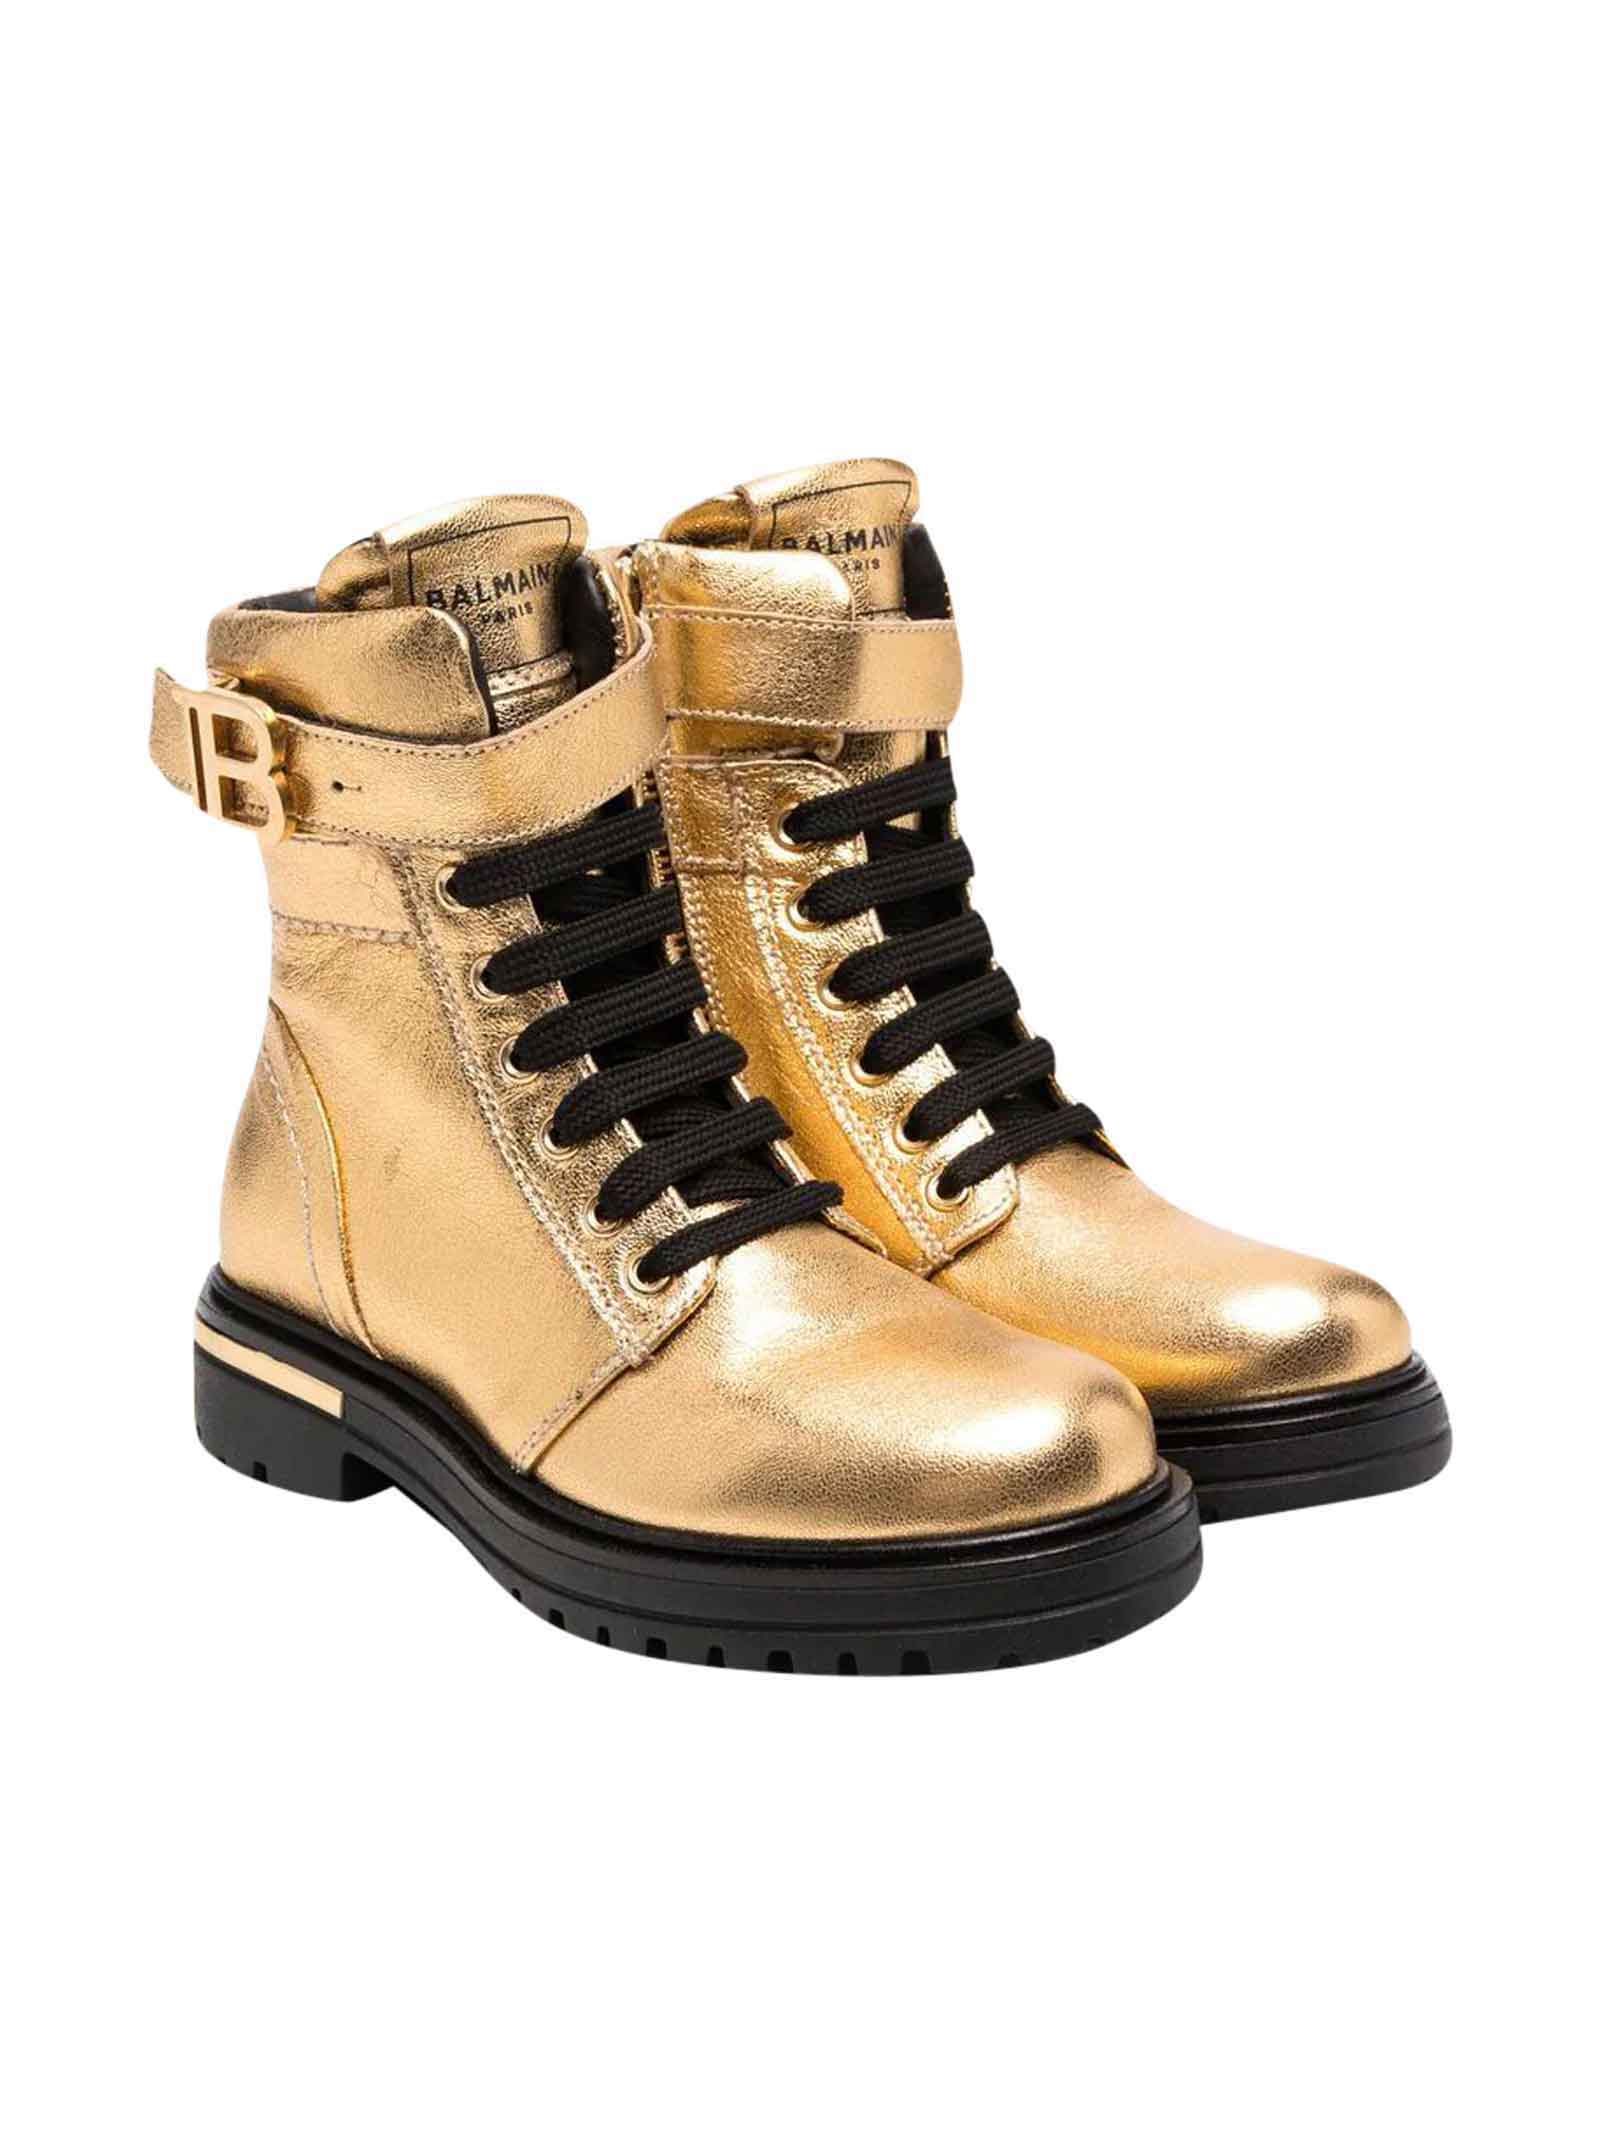 Balmain Gold Ankle Boots With Application